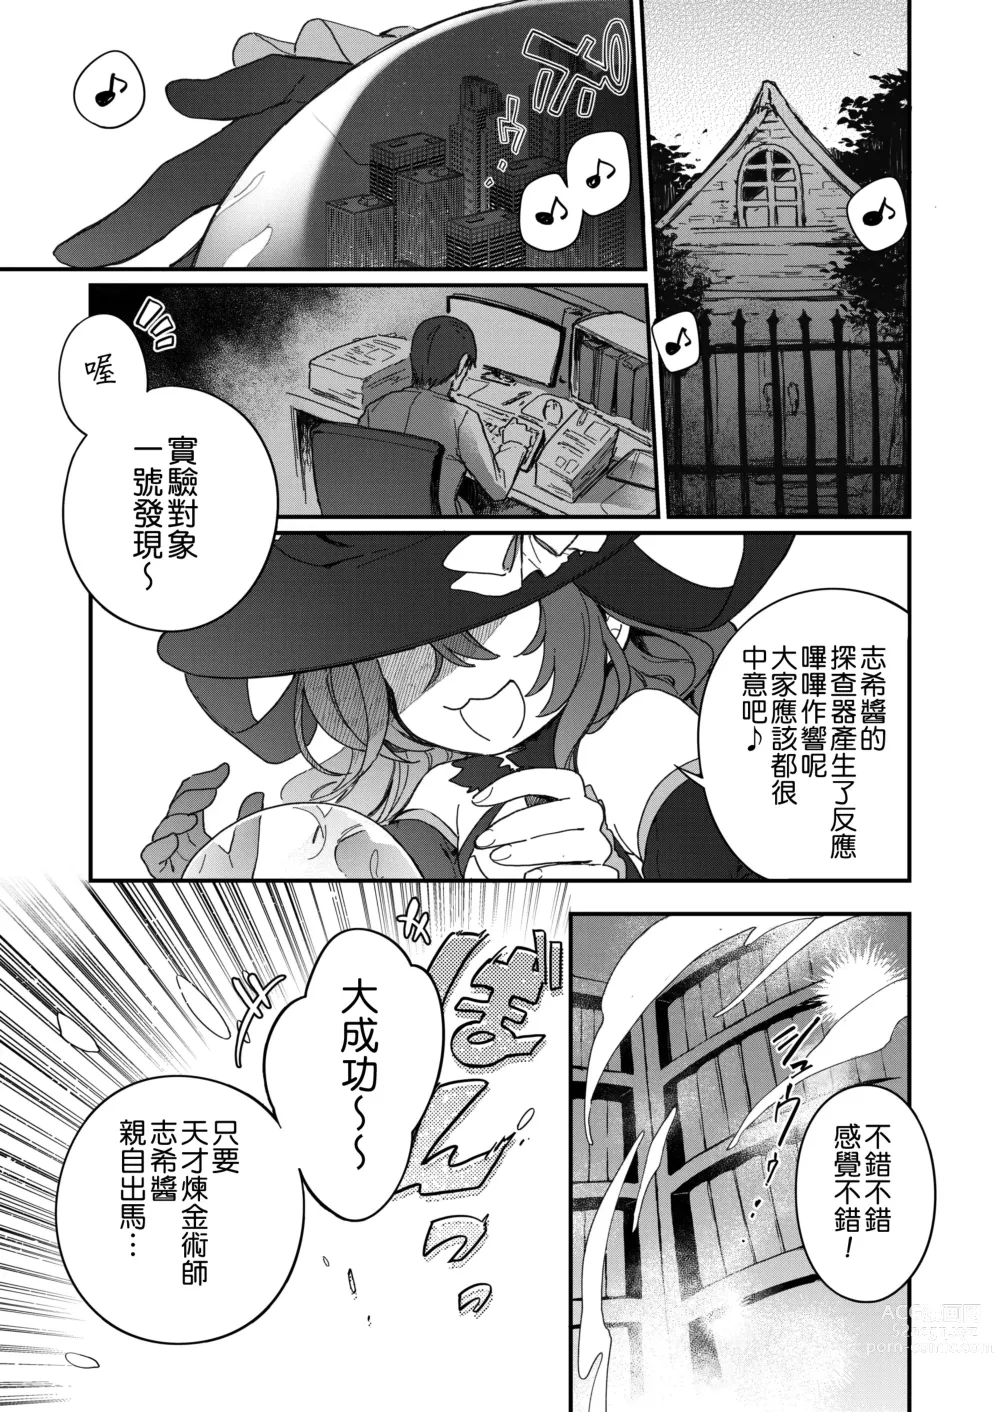 Page 3 of doujinshi Harem Halloween Party